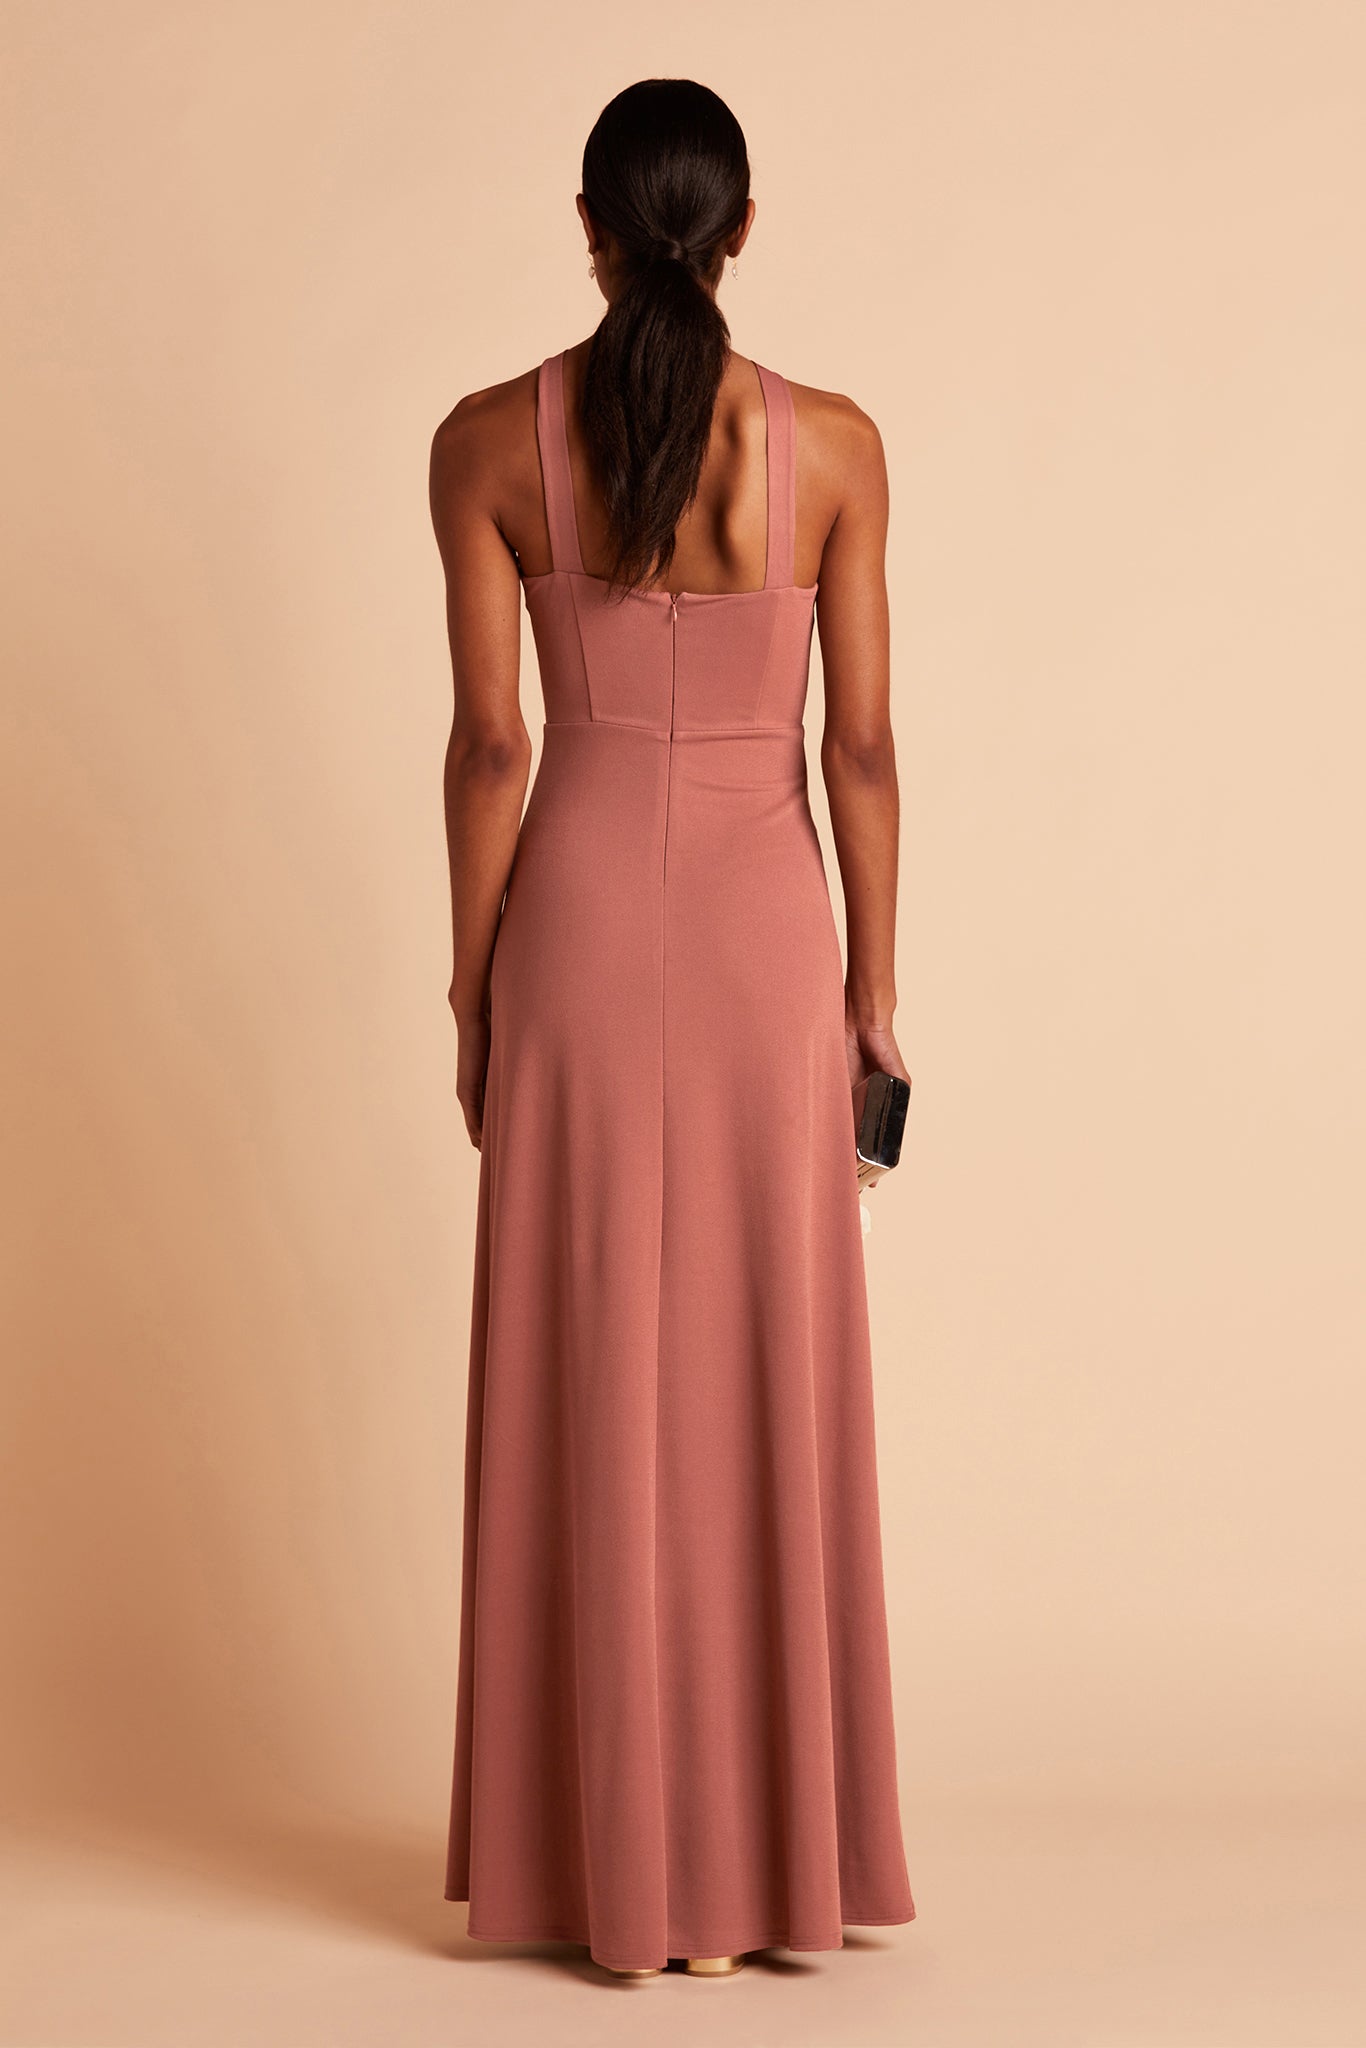 Gene bridesmaid dress with slit in desert rose crepe by Birdy Grey, back view